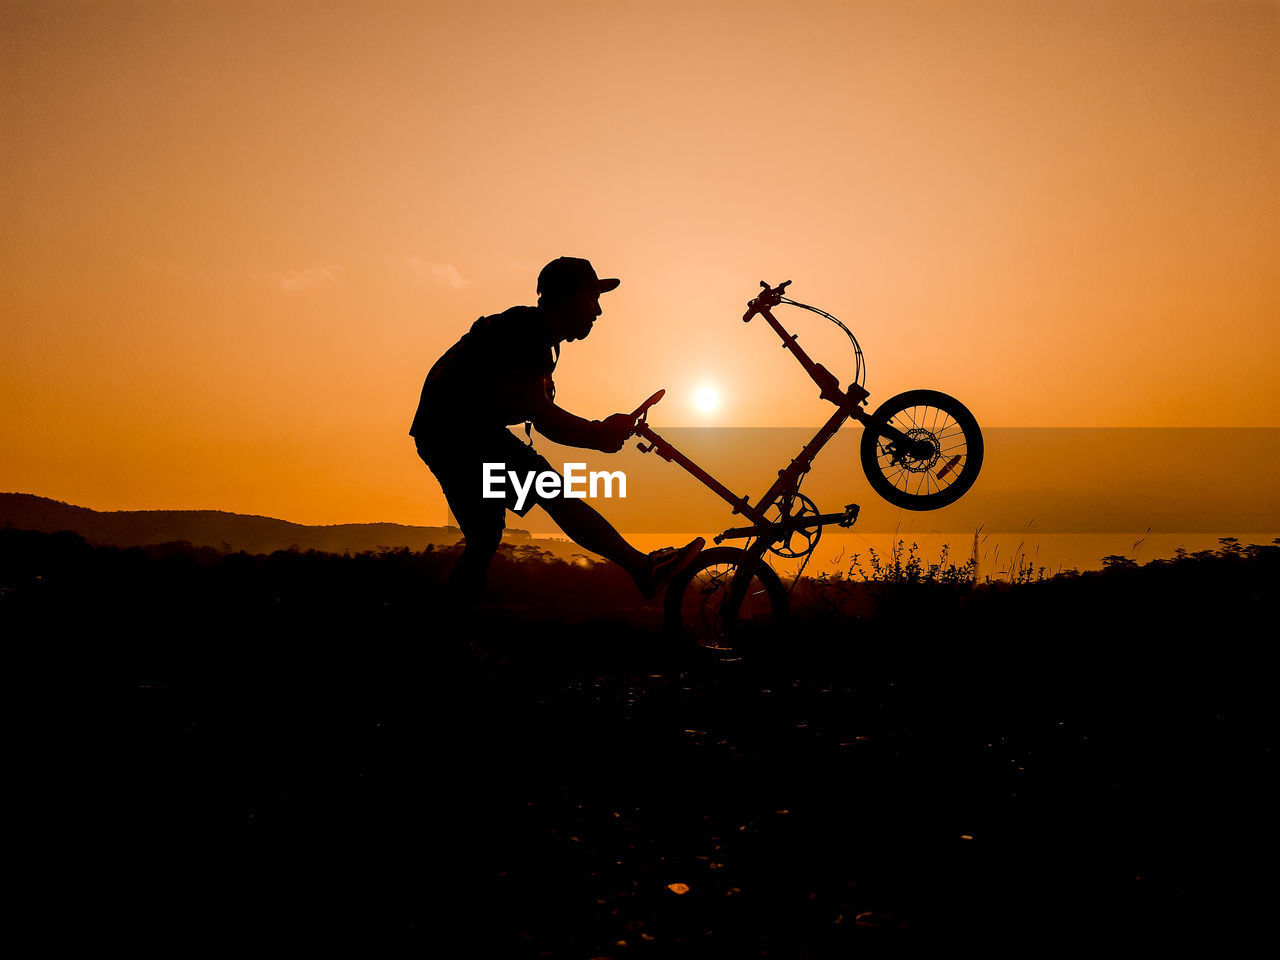 Silhouette man riding bicycle on land against sky during sunset